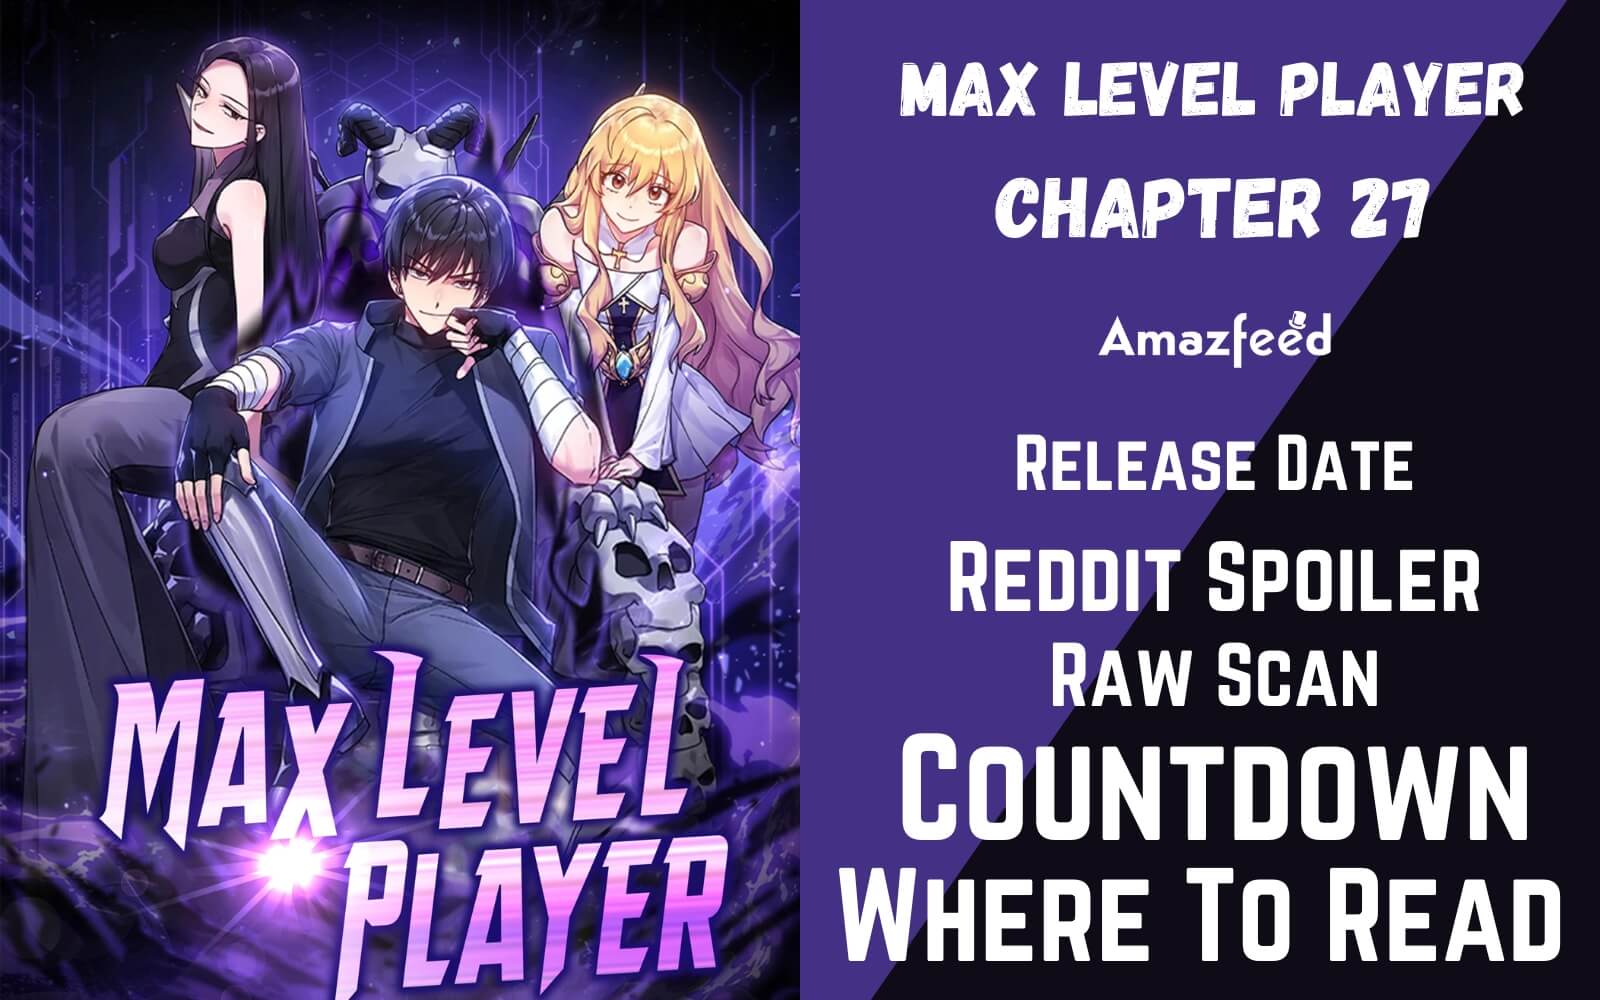 The 100th Regression of the Max-Level Player] This newly released